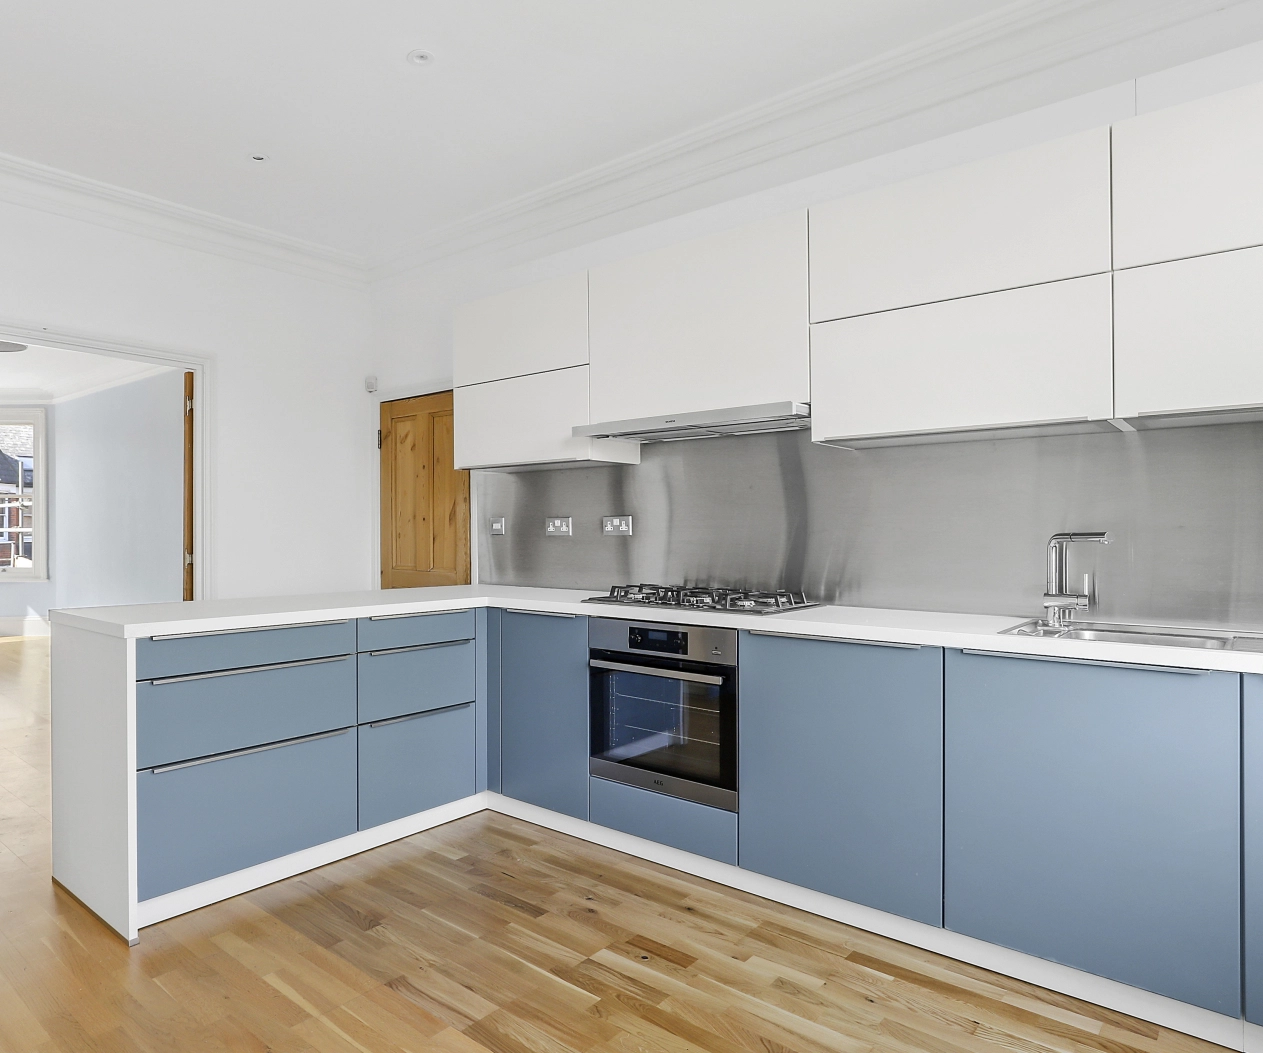 German kitchen with blue cupboard fronts and stainless steel handles